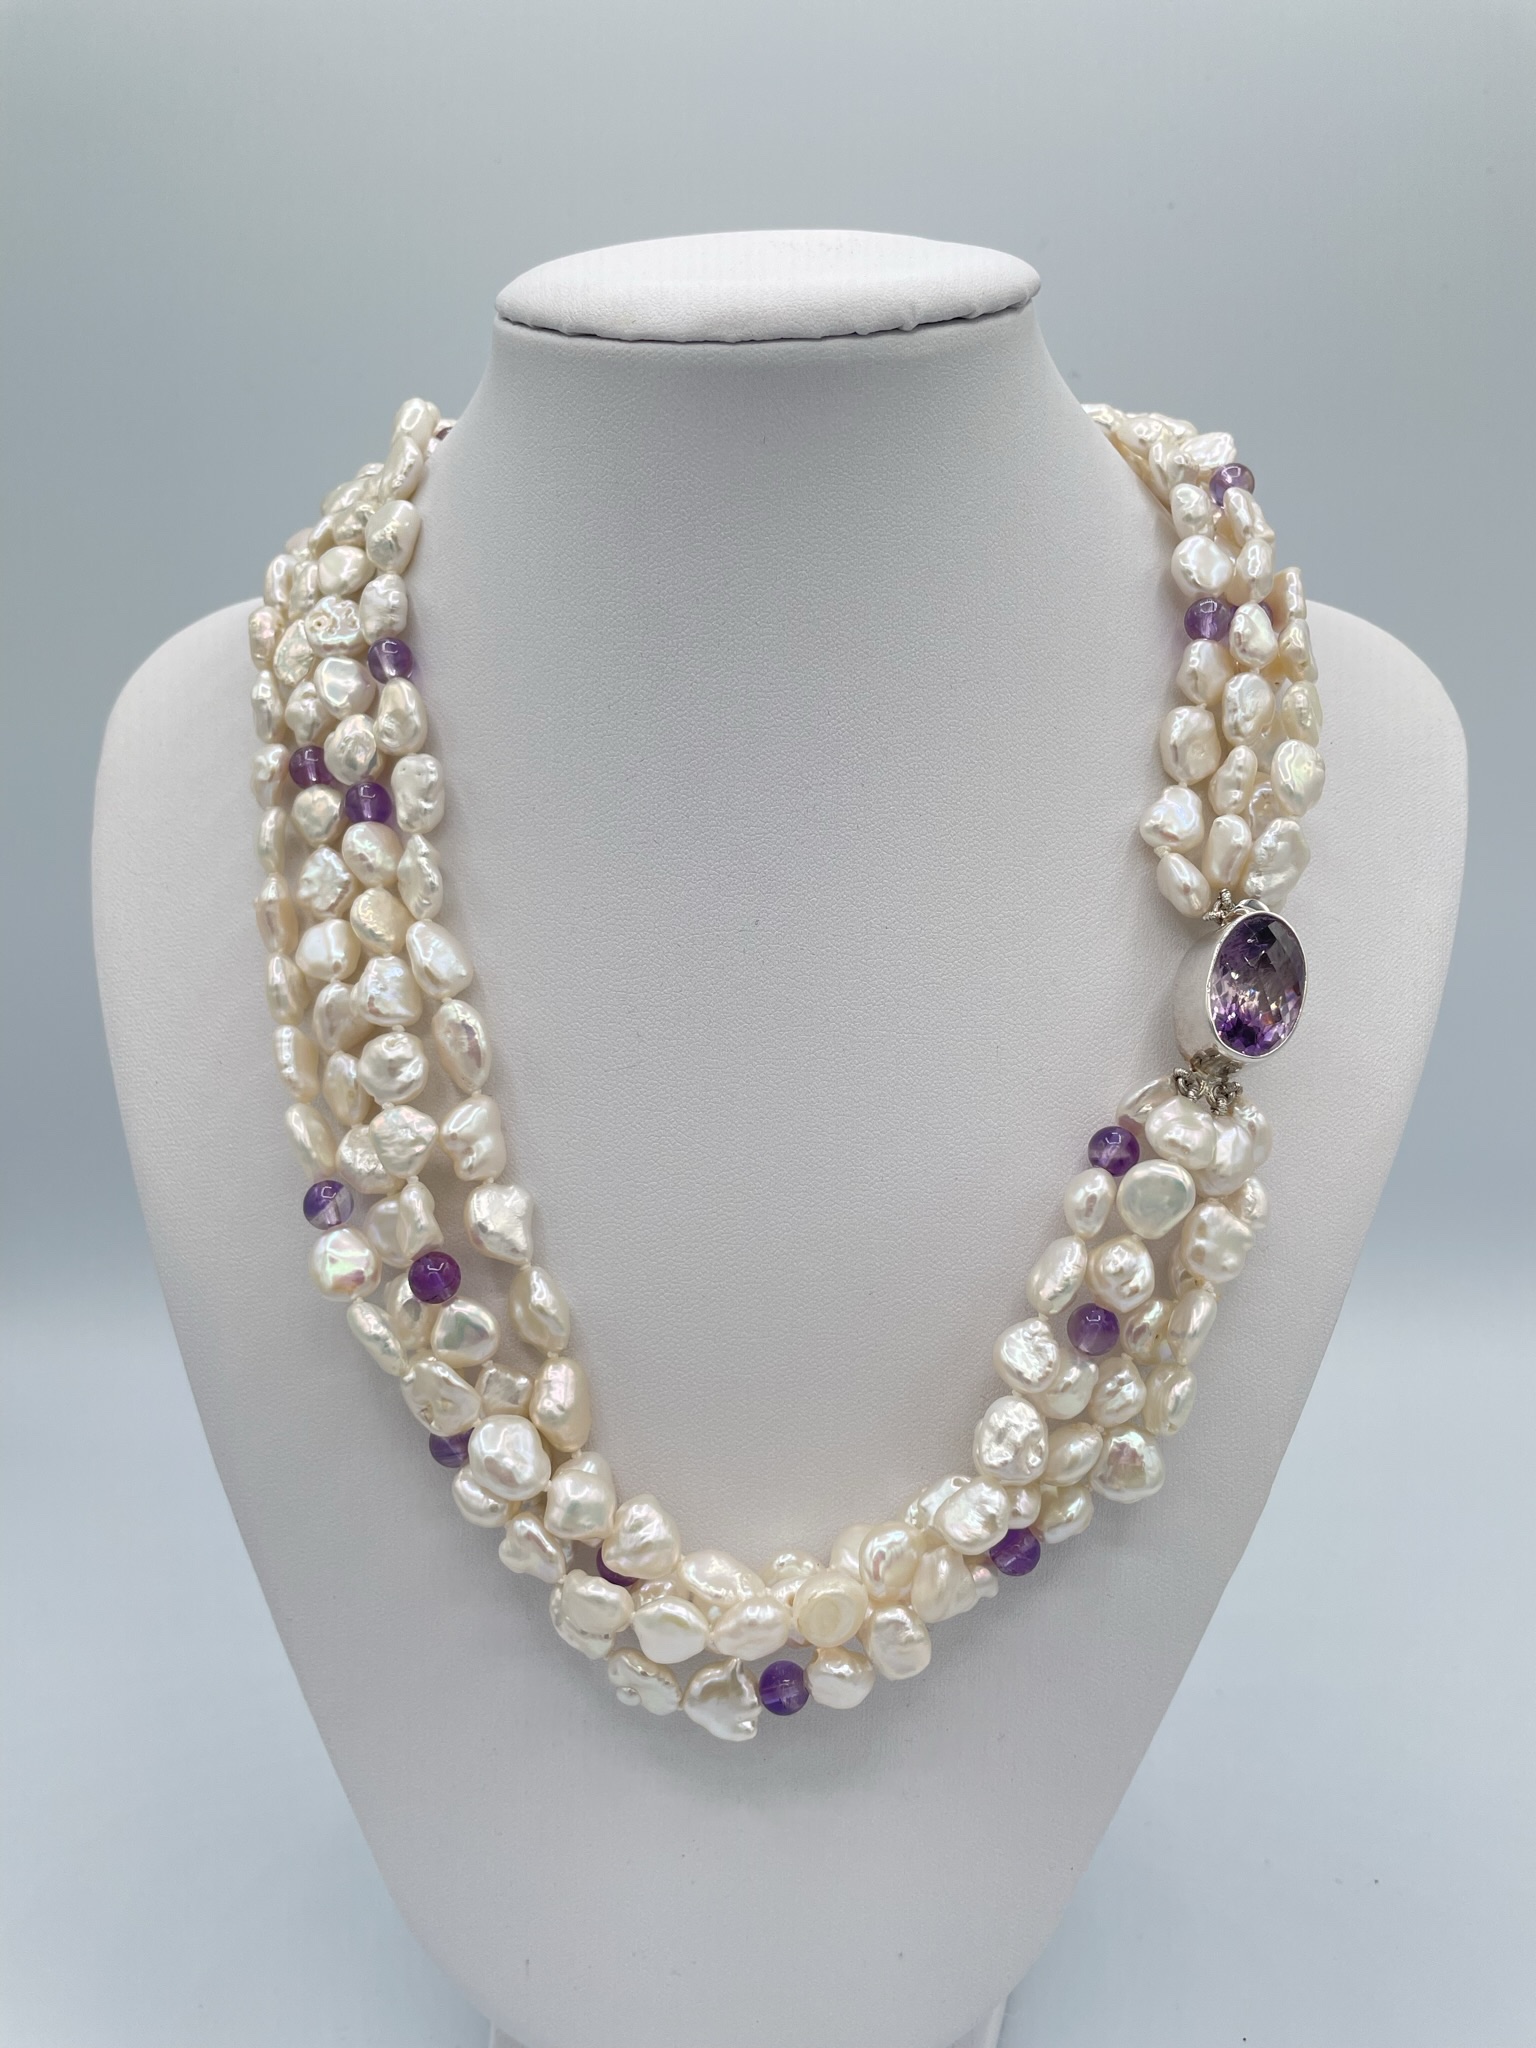 https://nantucketpearlcompany.com/2018/wp-content/uploads/2023/04/N2363-Triple-strand-keshi-pearls-6.5-round-amethyst-Amethyst-stone-and-sterling-clasp-20-in-250.jpg